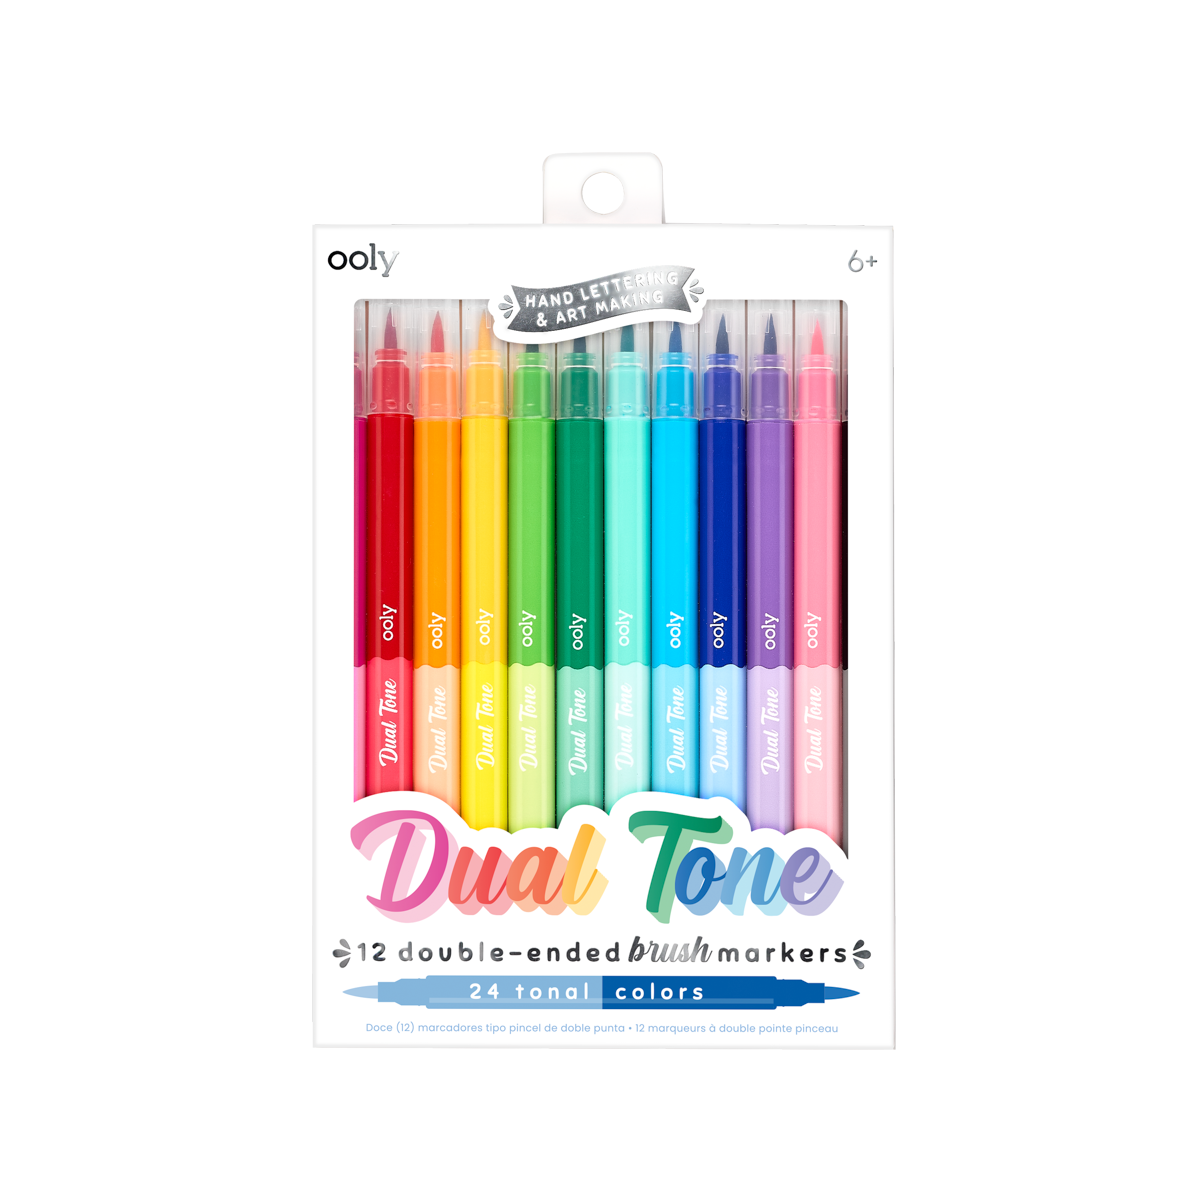 OOLY Dual Tone Double Ended Brush Marker in packaging